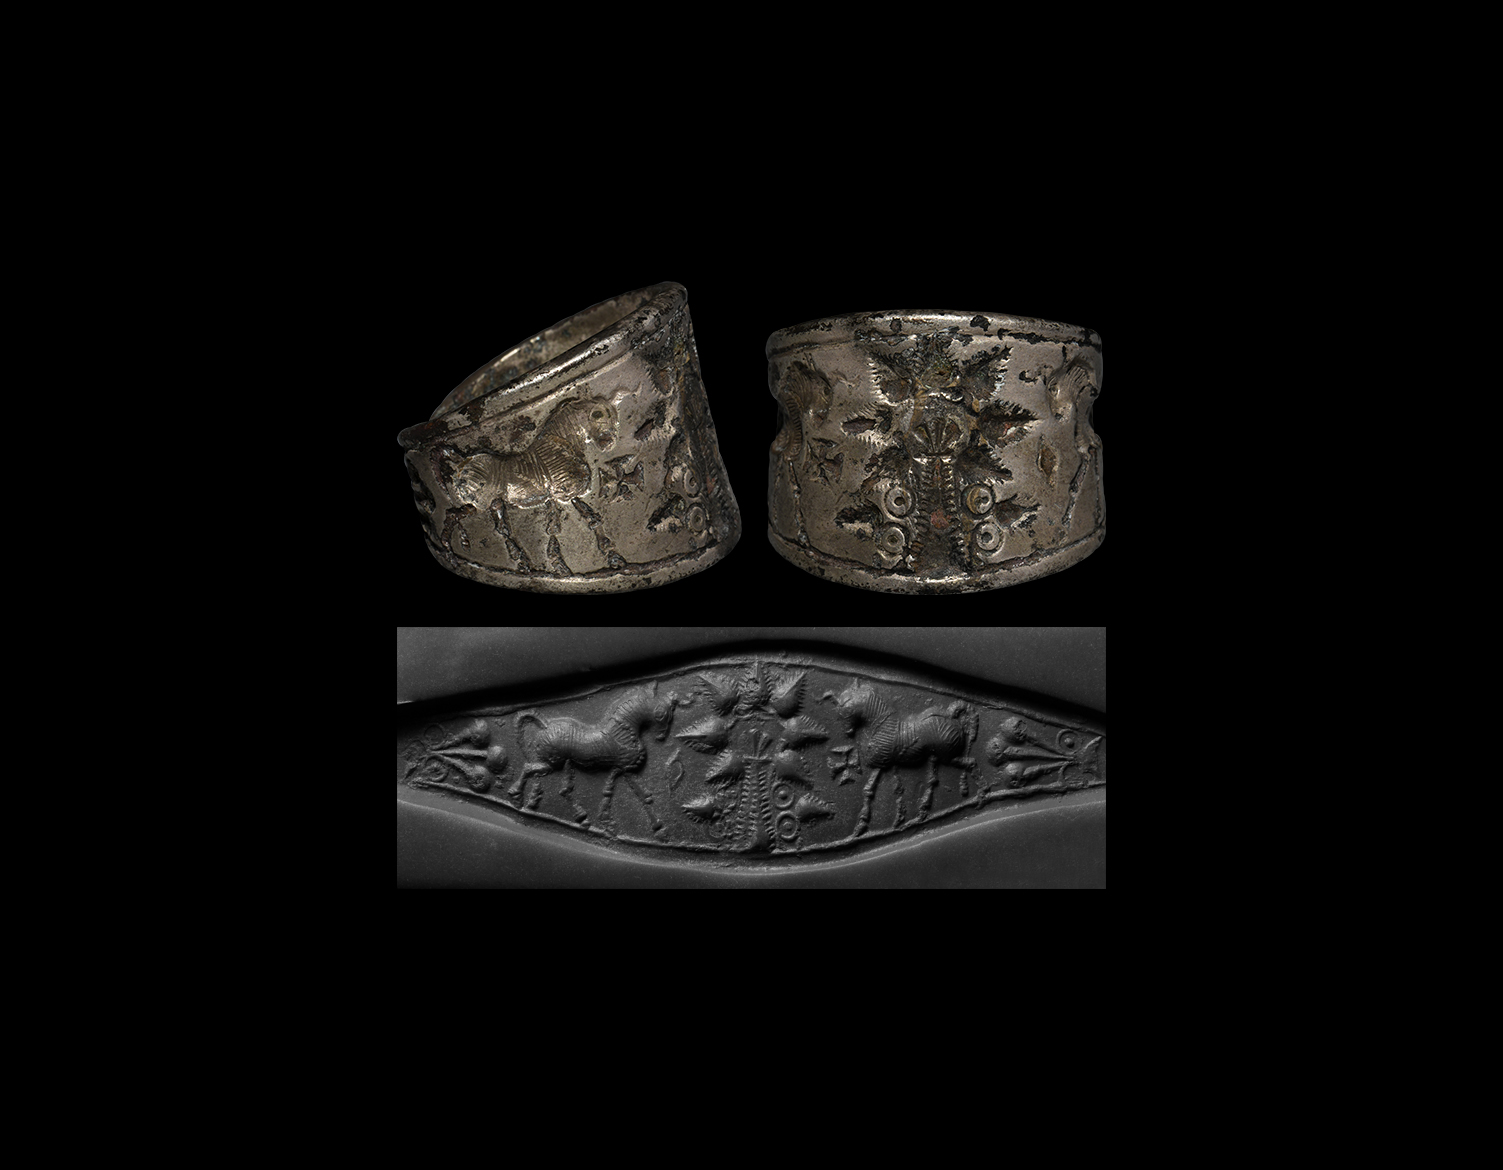 Ring with Two Heraldic Bulls Next to the Tree of Life